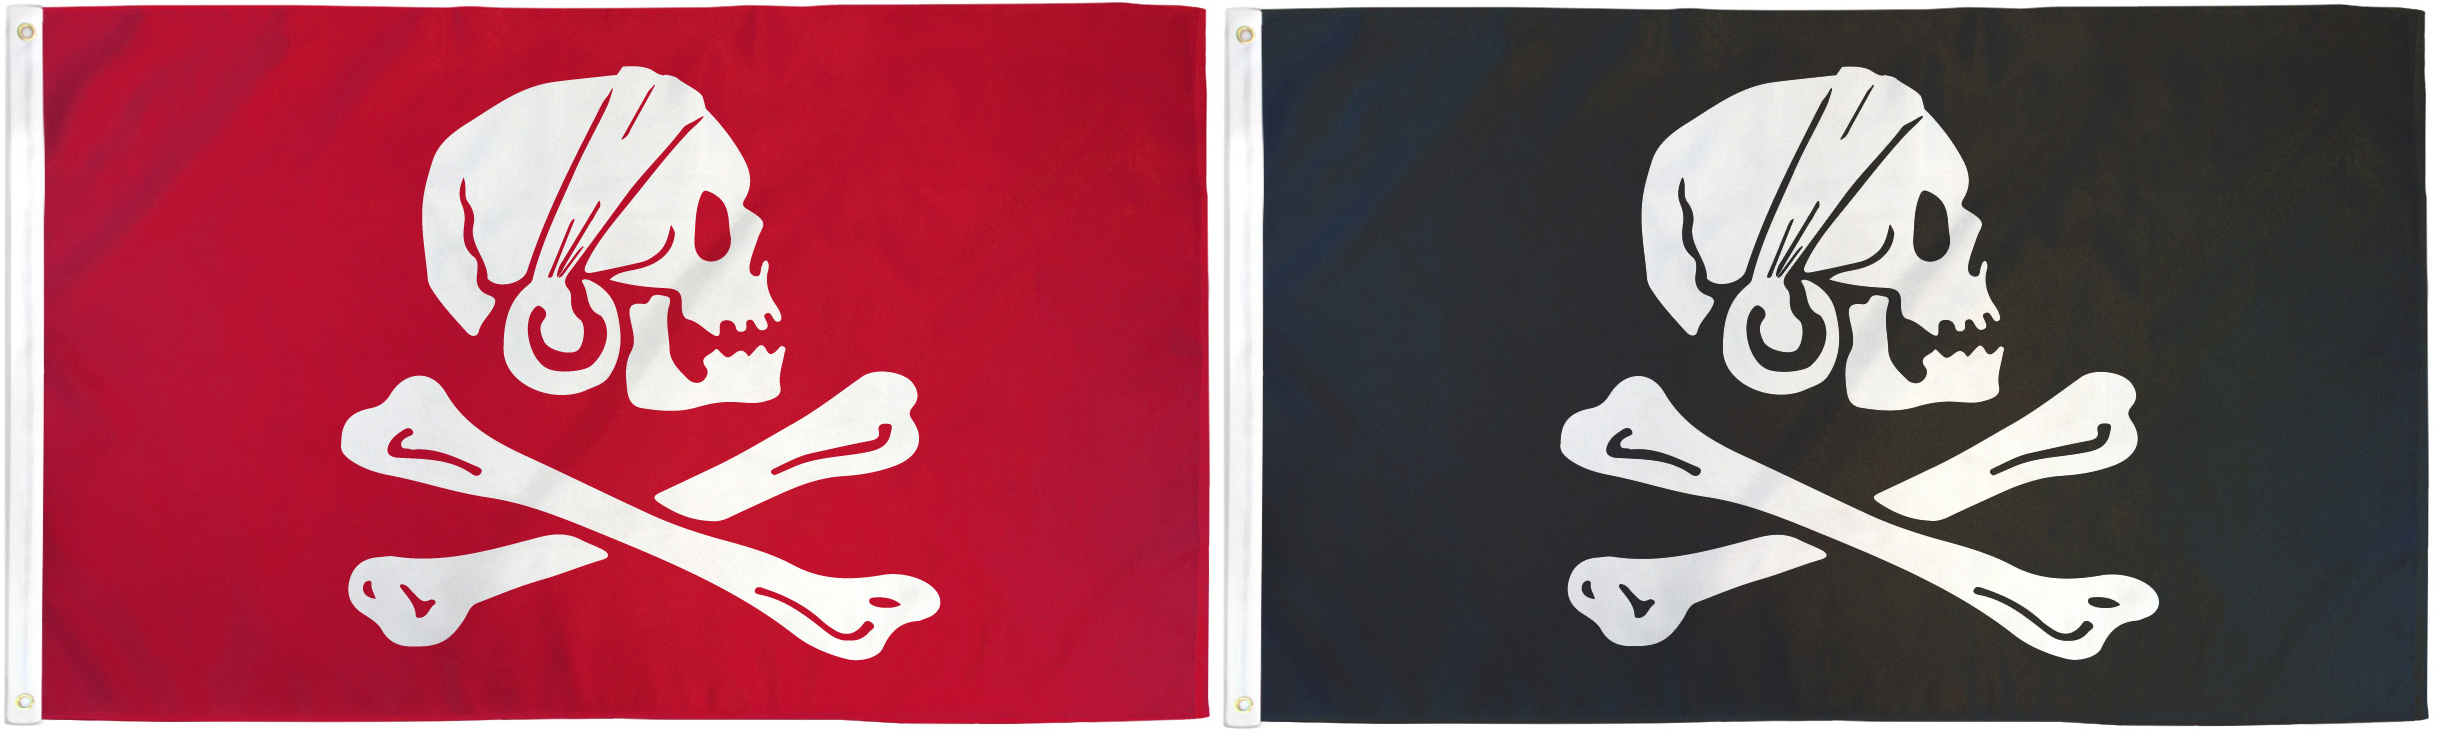 Henry Avery Red 3x5ft Pirate Flag & Henry Avery Black 3x5ft Pirate Flag